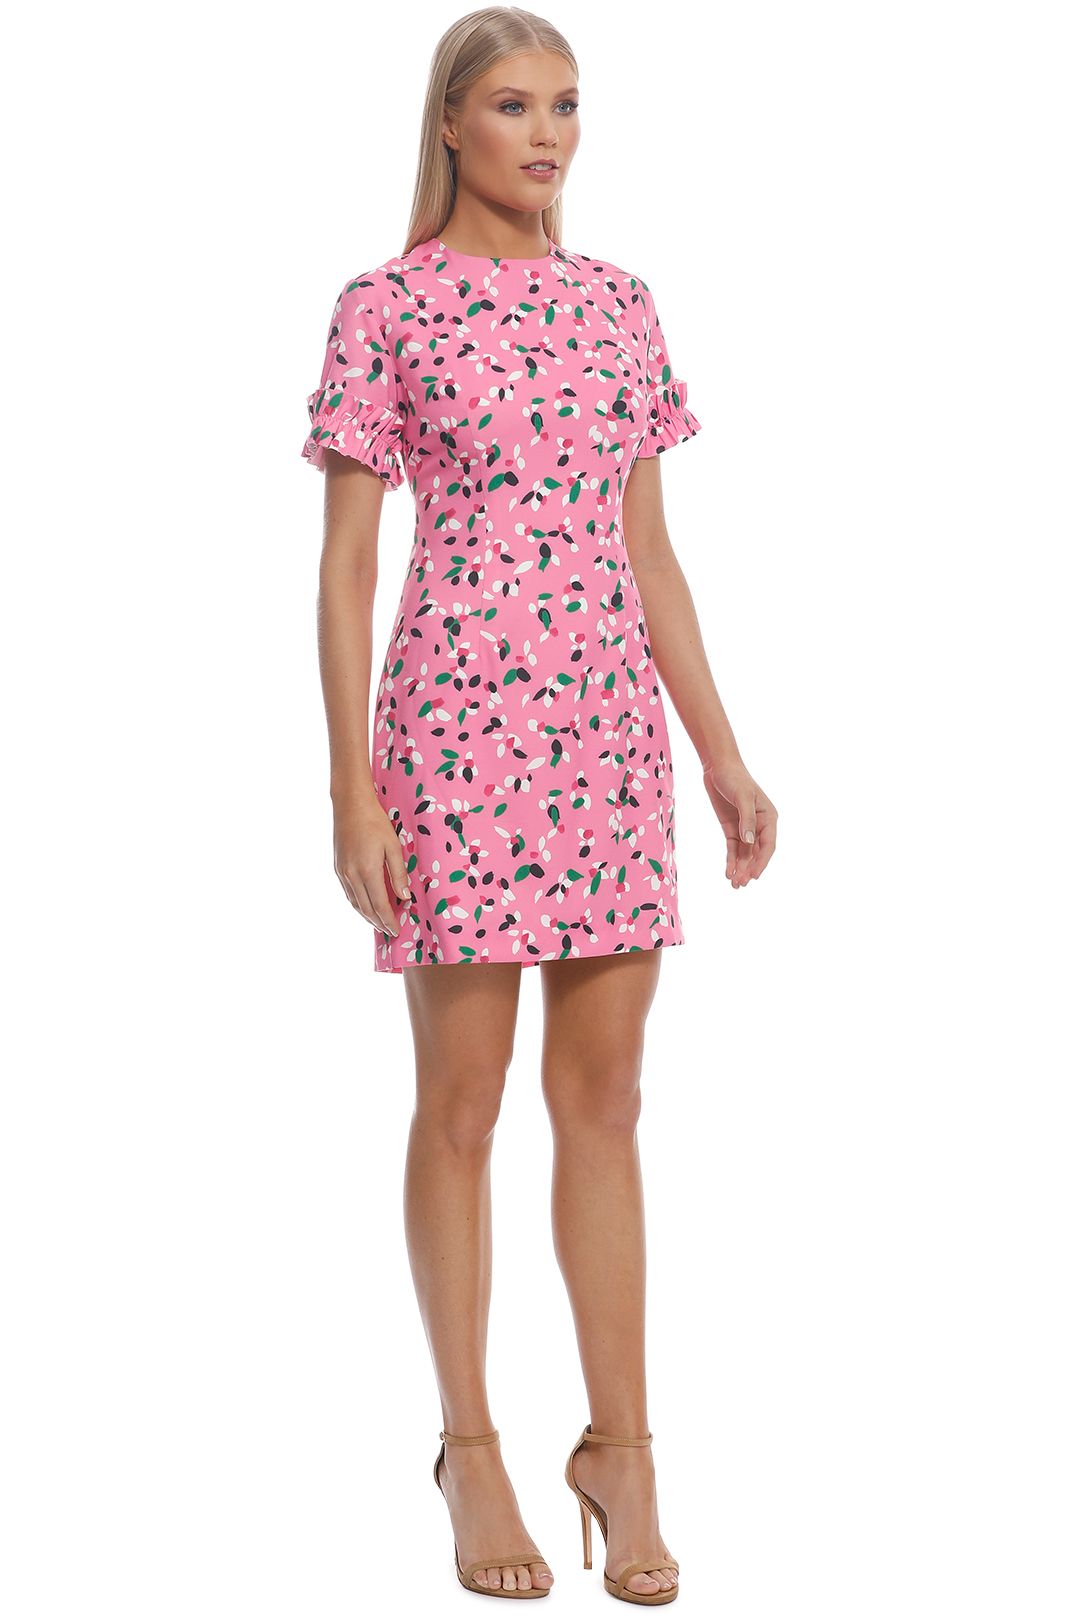 By Johnny - Painted Petal Ruffle Tee Dress - Pink - Side